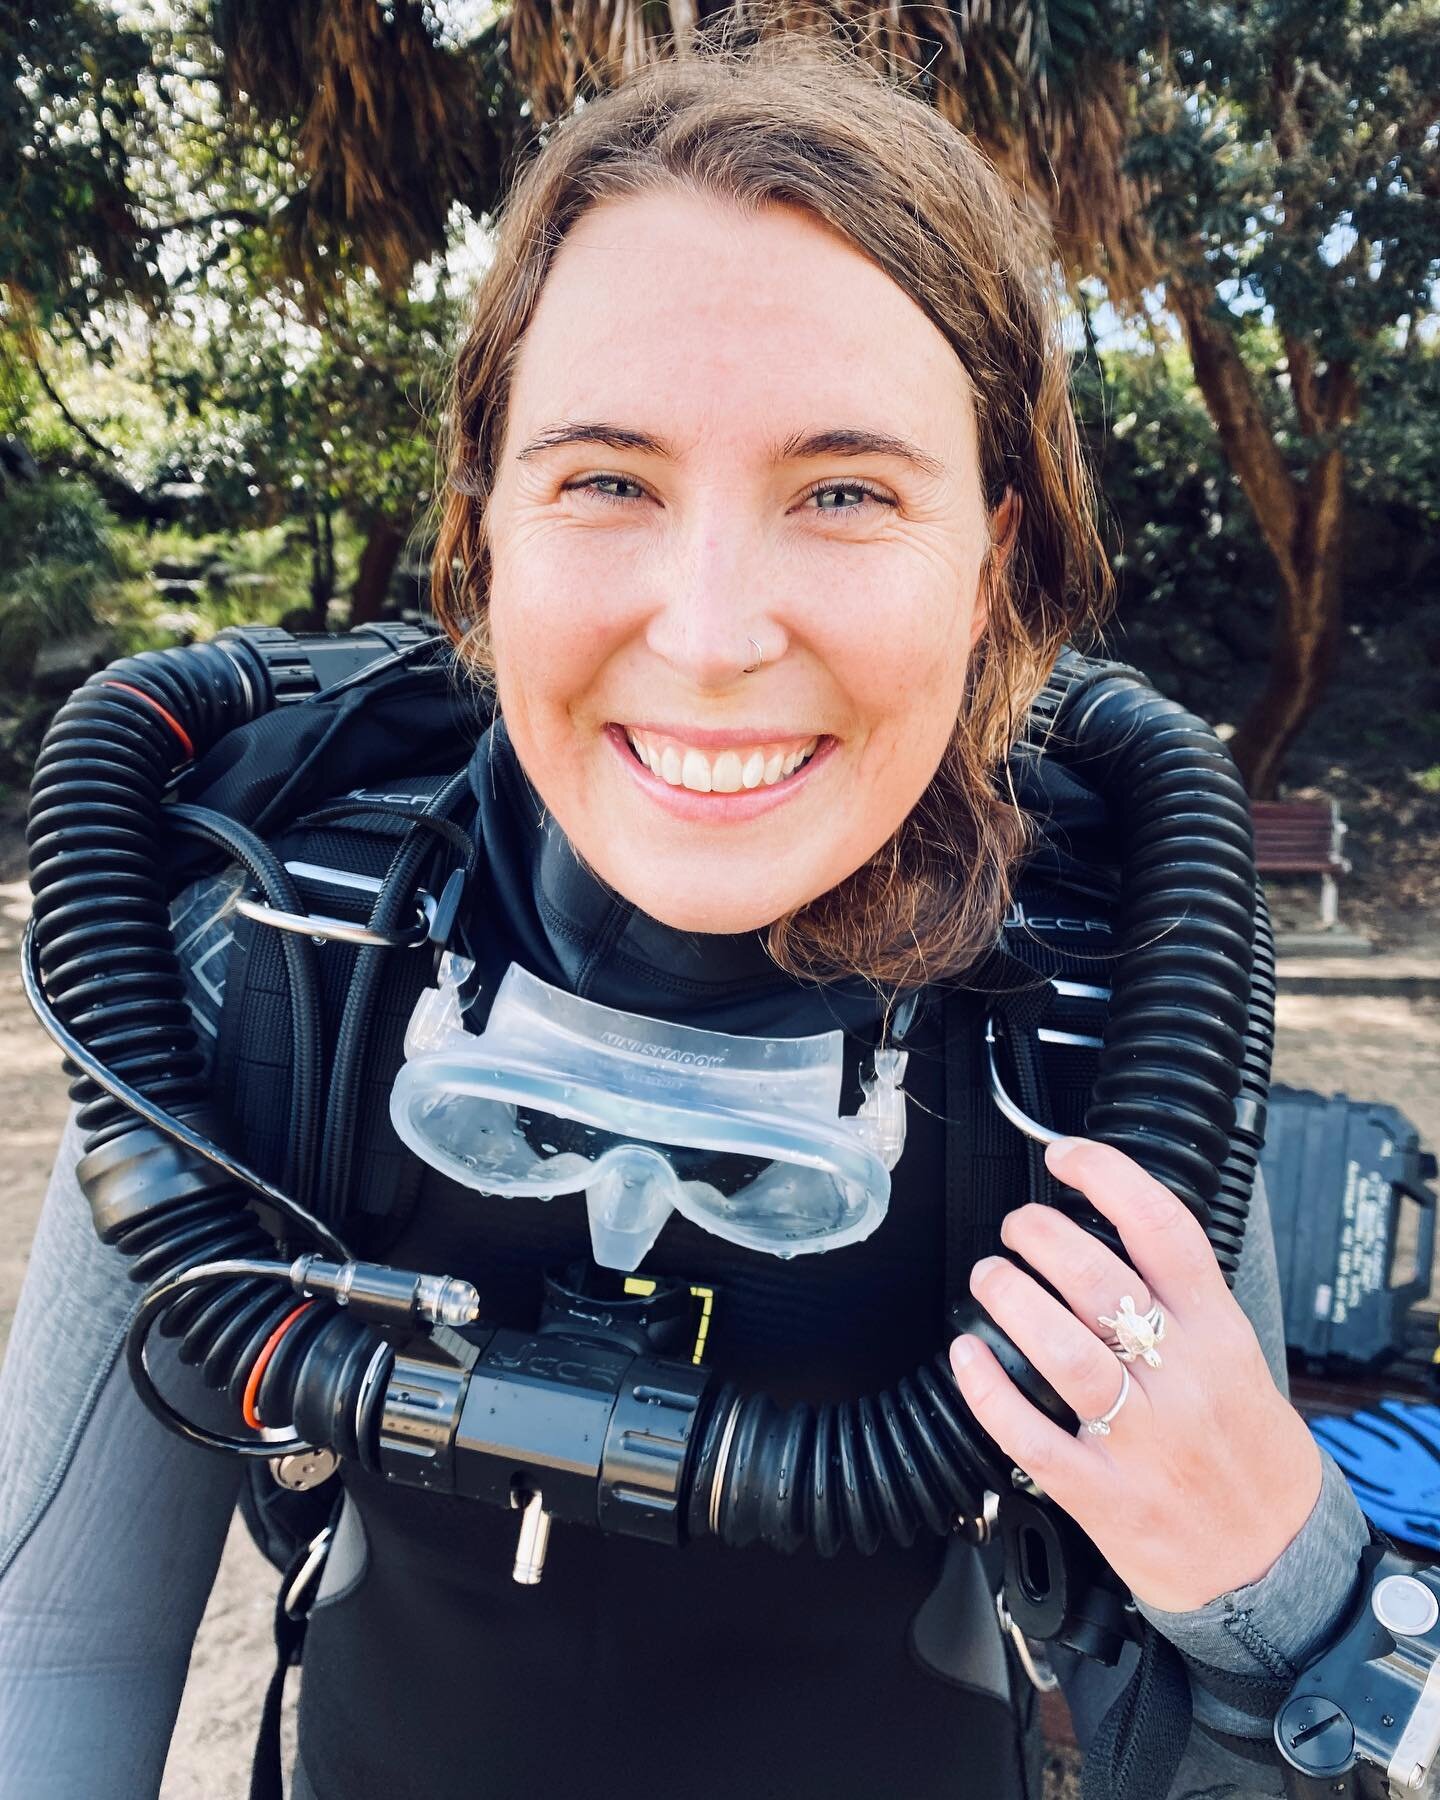 I&rsquo;ve spent all weekend trying to convince the giant cuttlefish I&rsquo;m one of them because I too can dive without bubbles. I think they bought it, cos they touched me with their tentacles. And I&rsquo;m officially a rebreather nerd now weeeee